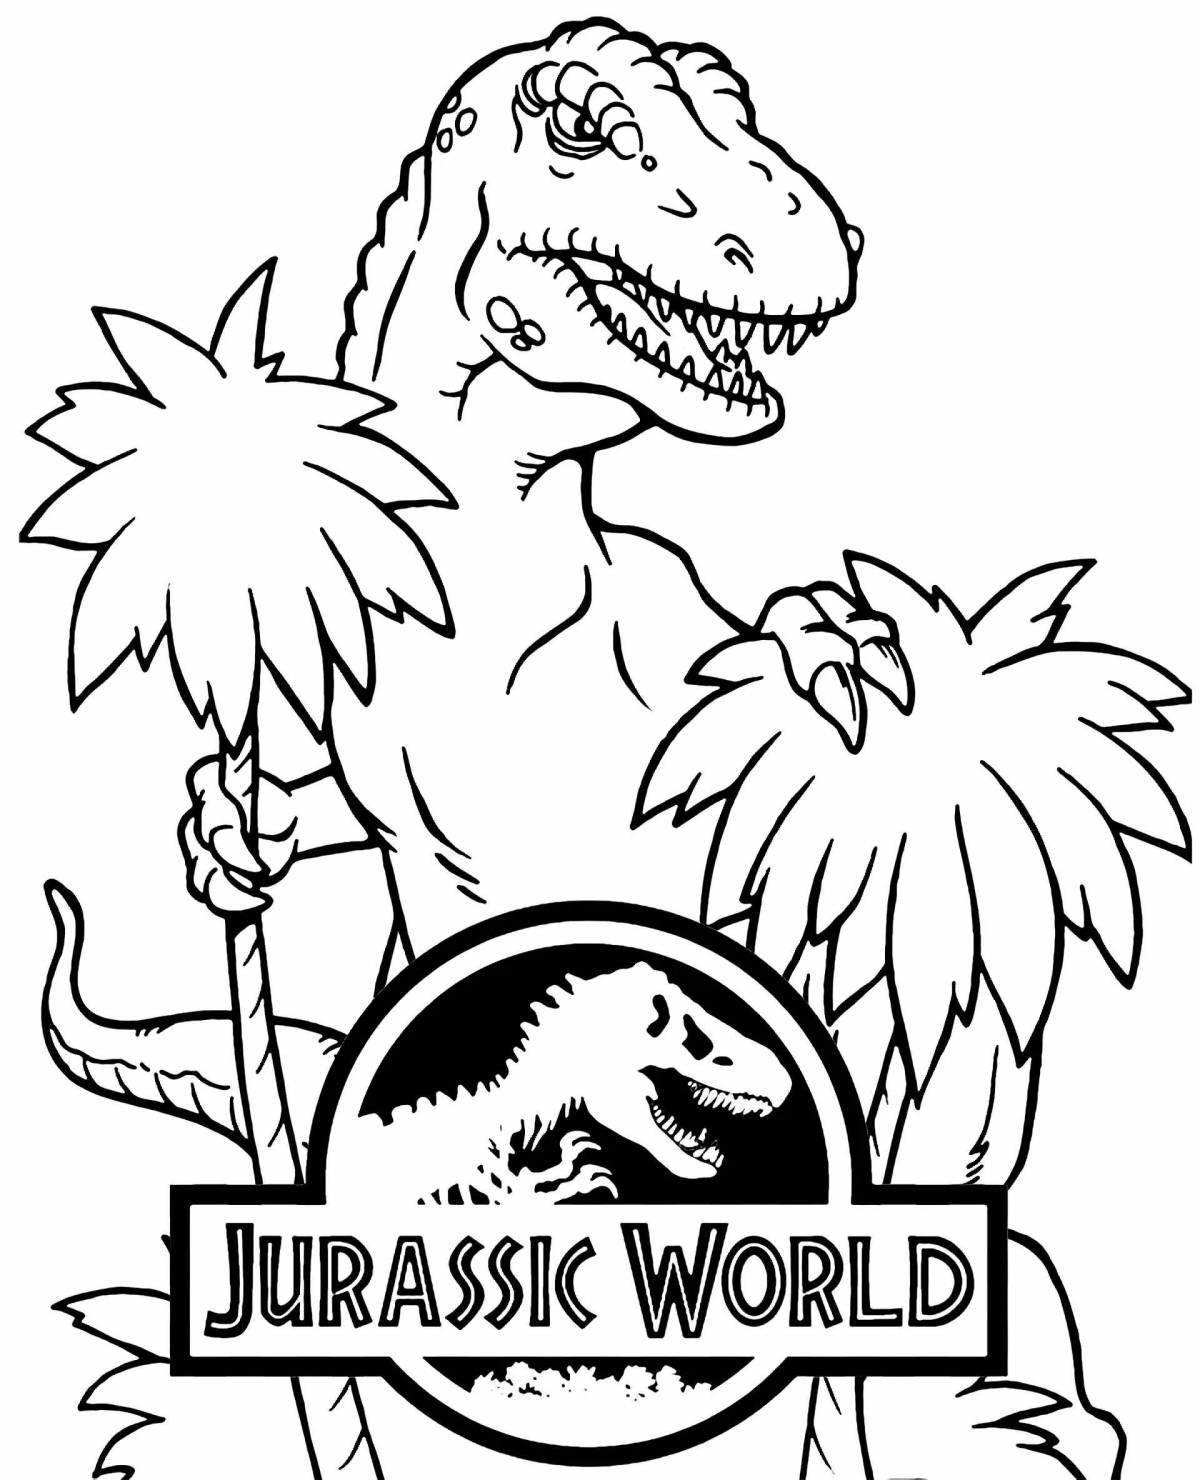 Coloring book colorful Jurassic world domination